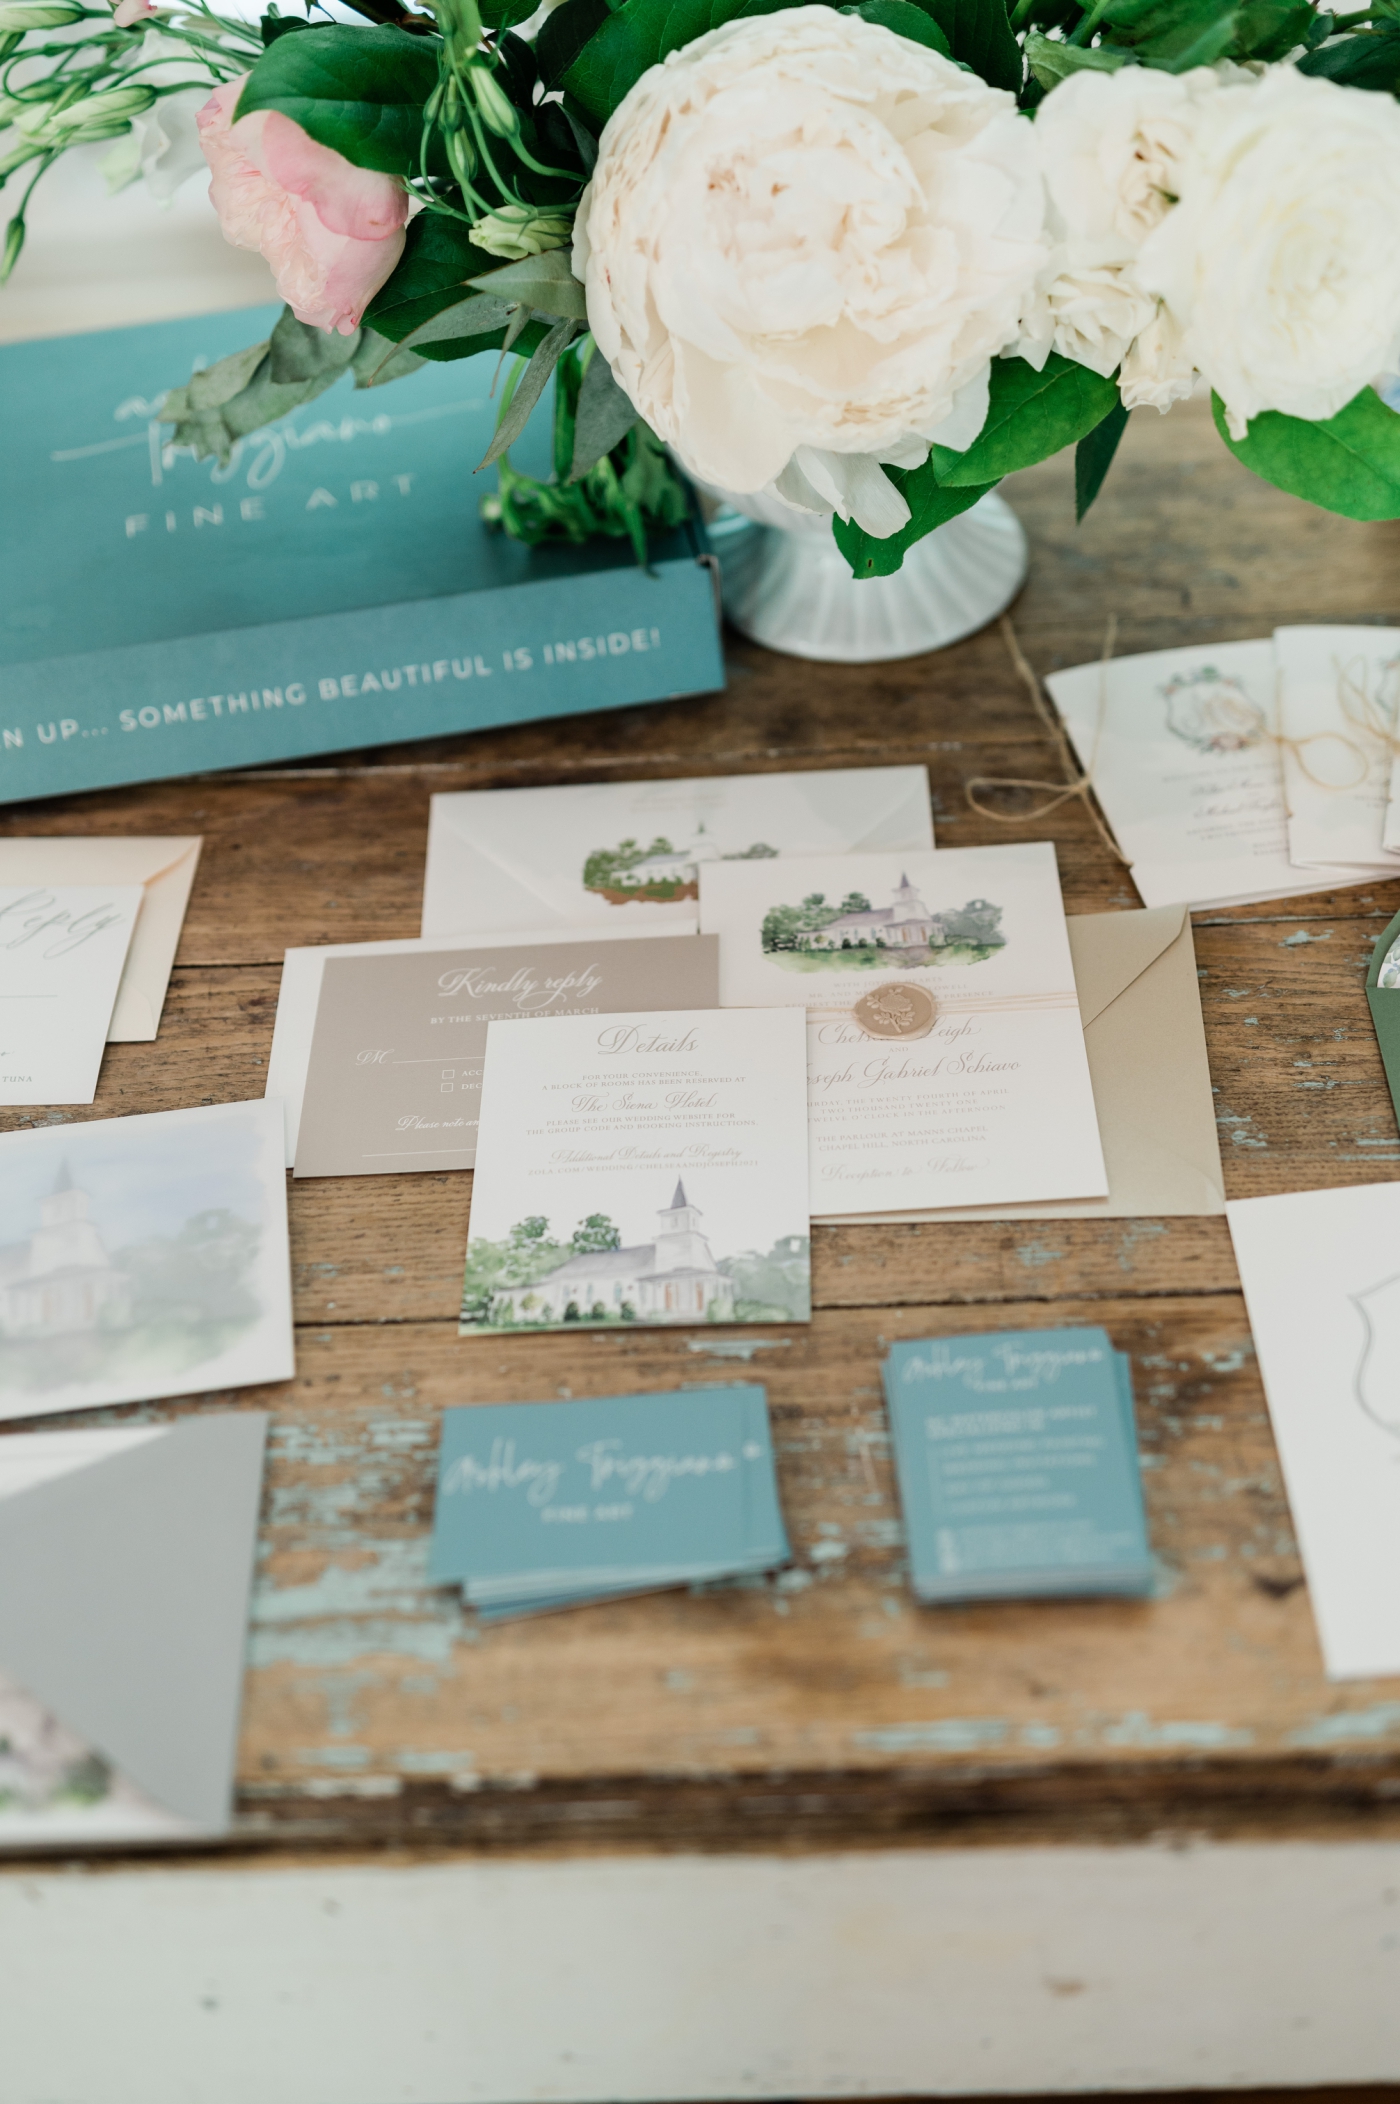 A breakdown of how much wedding invitations cost